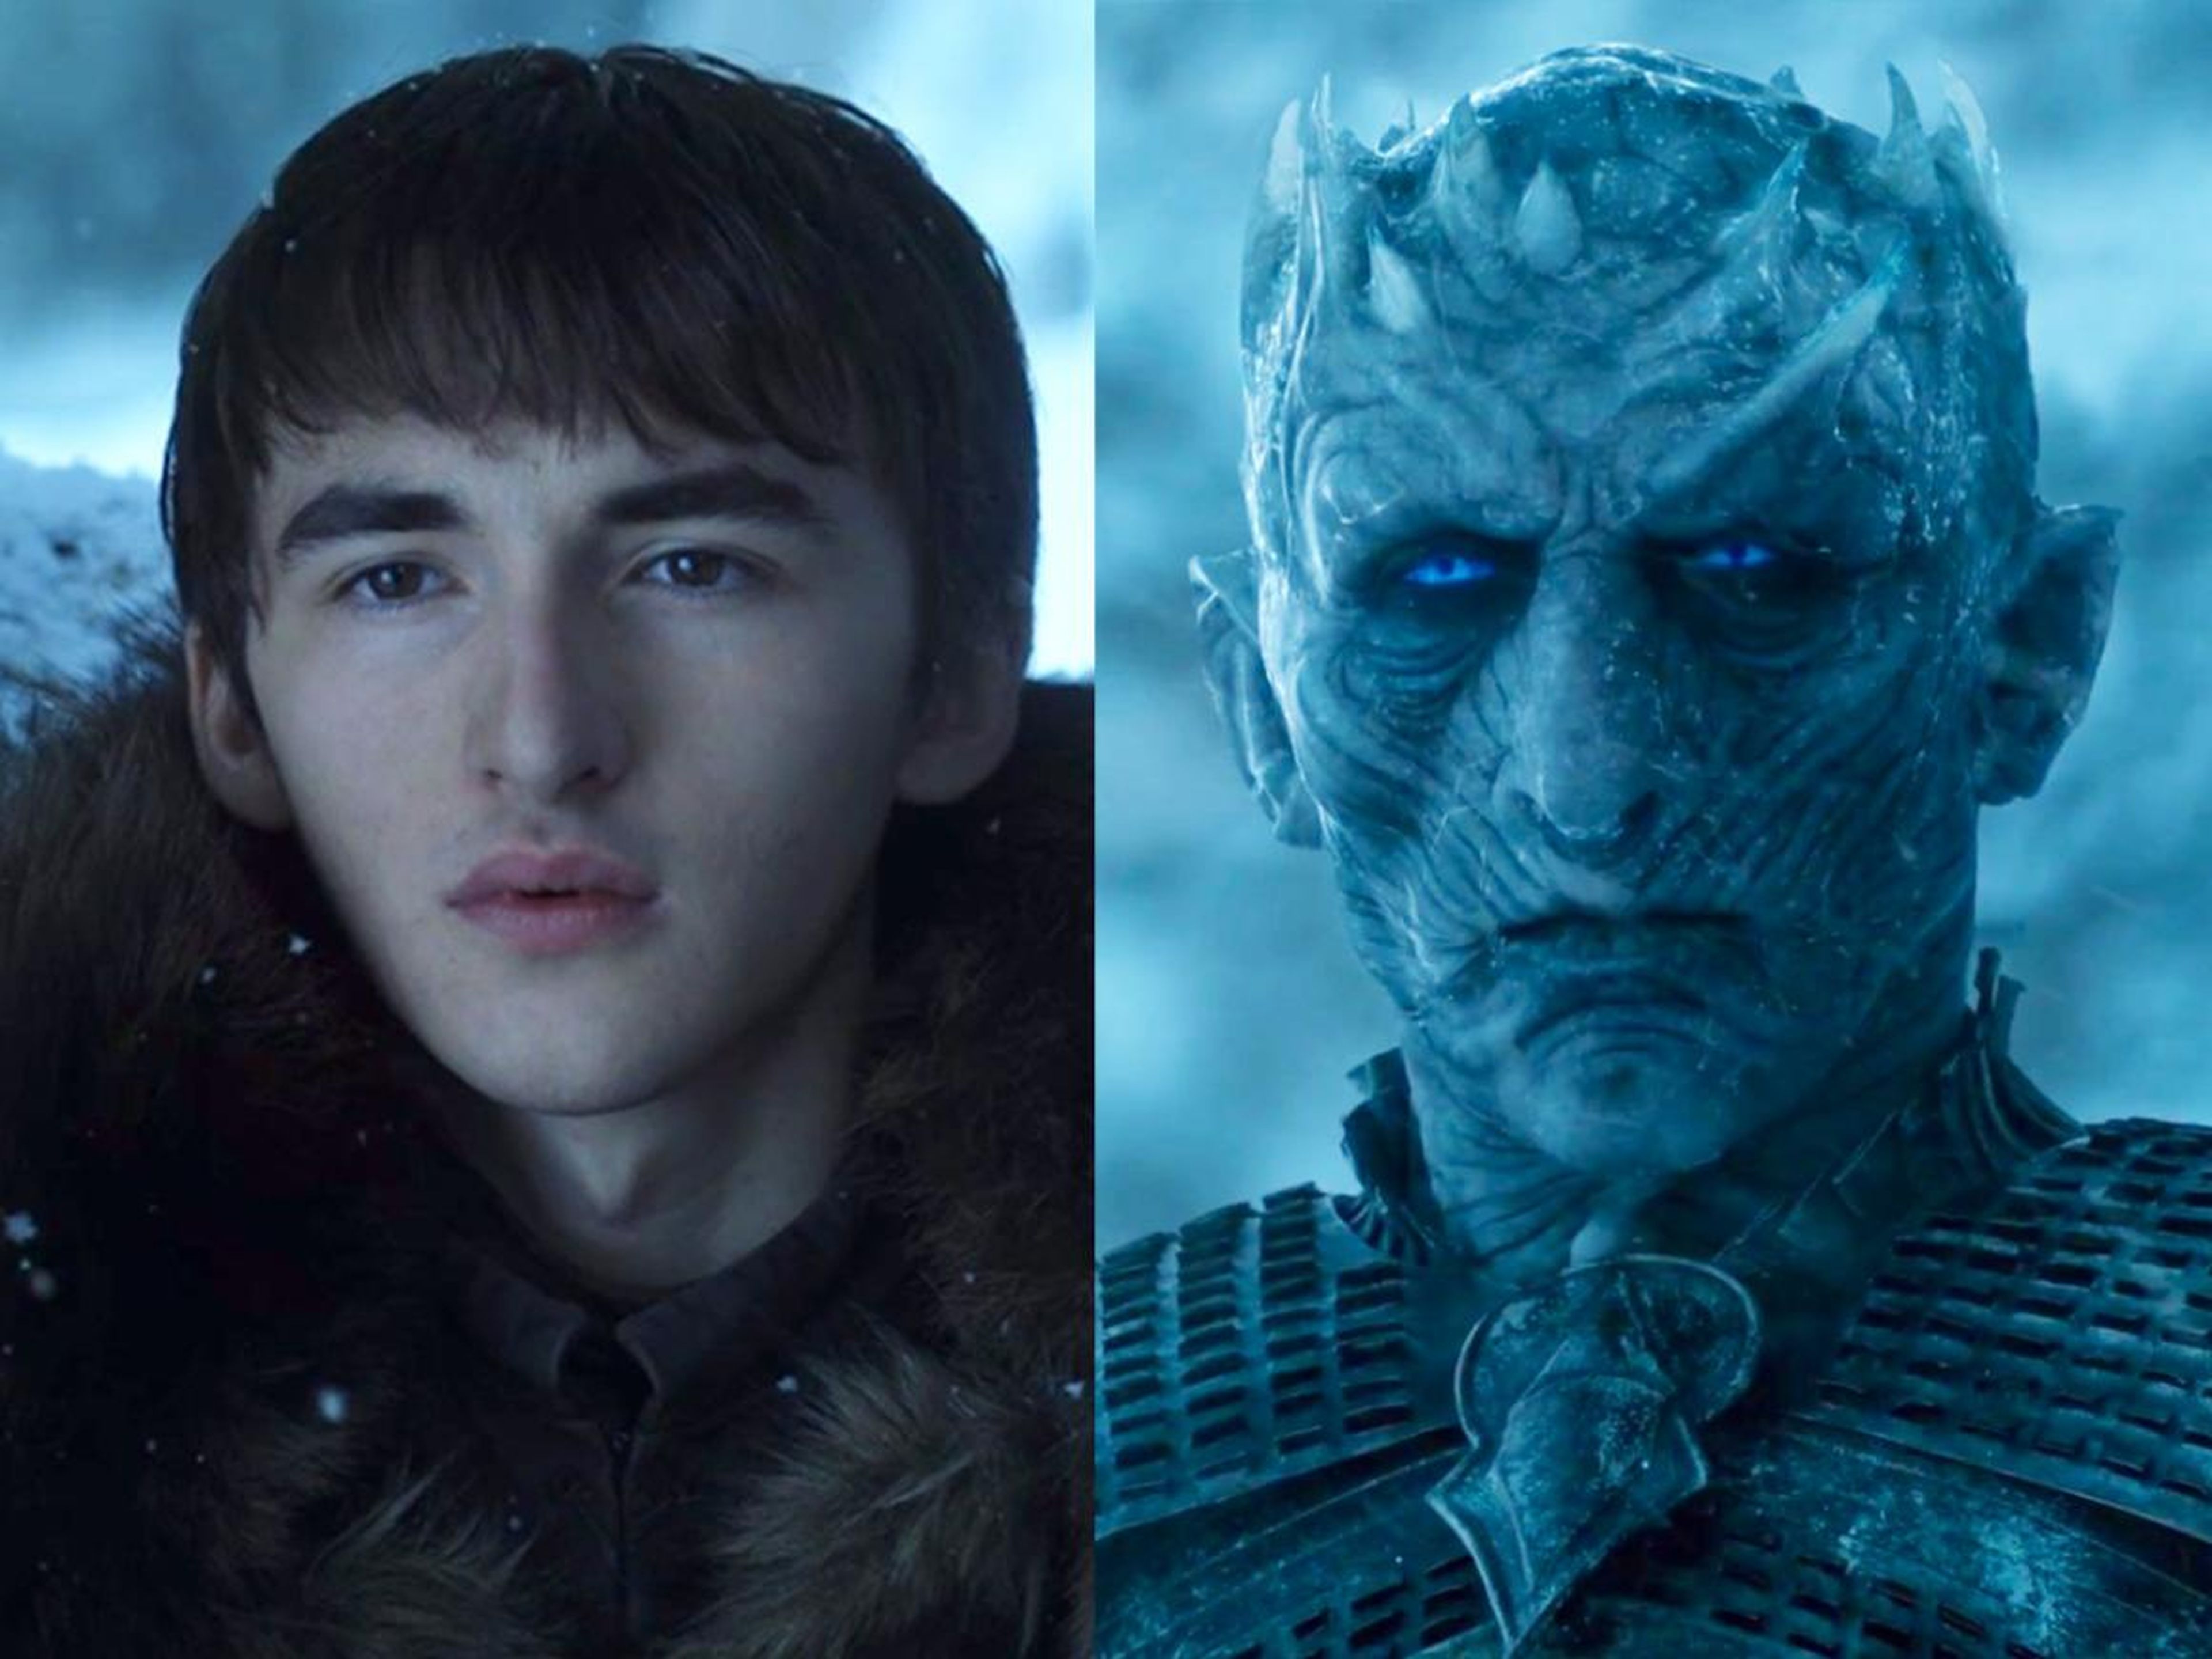 Just because they have a similar face shape doesn't mean Bran is literally the Night King.